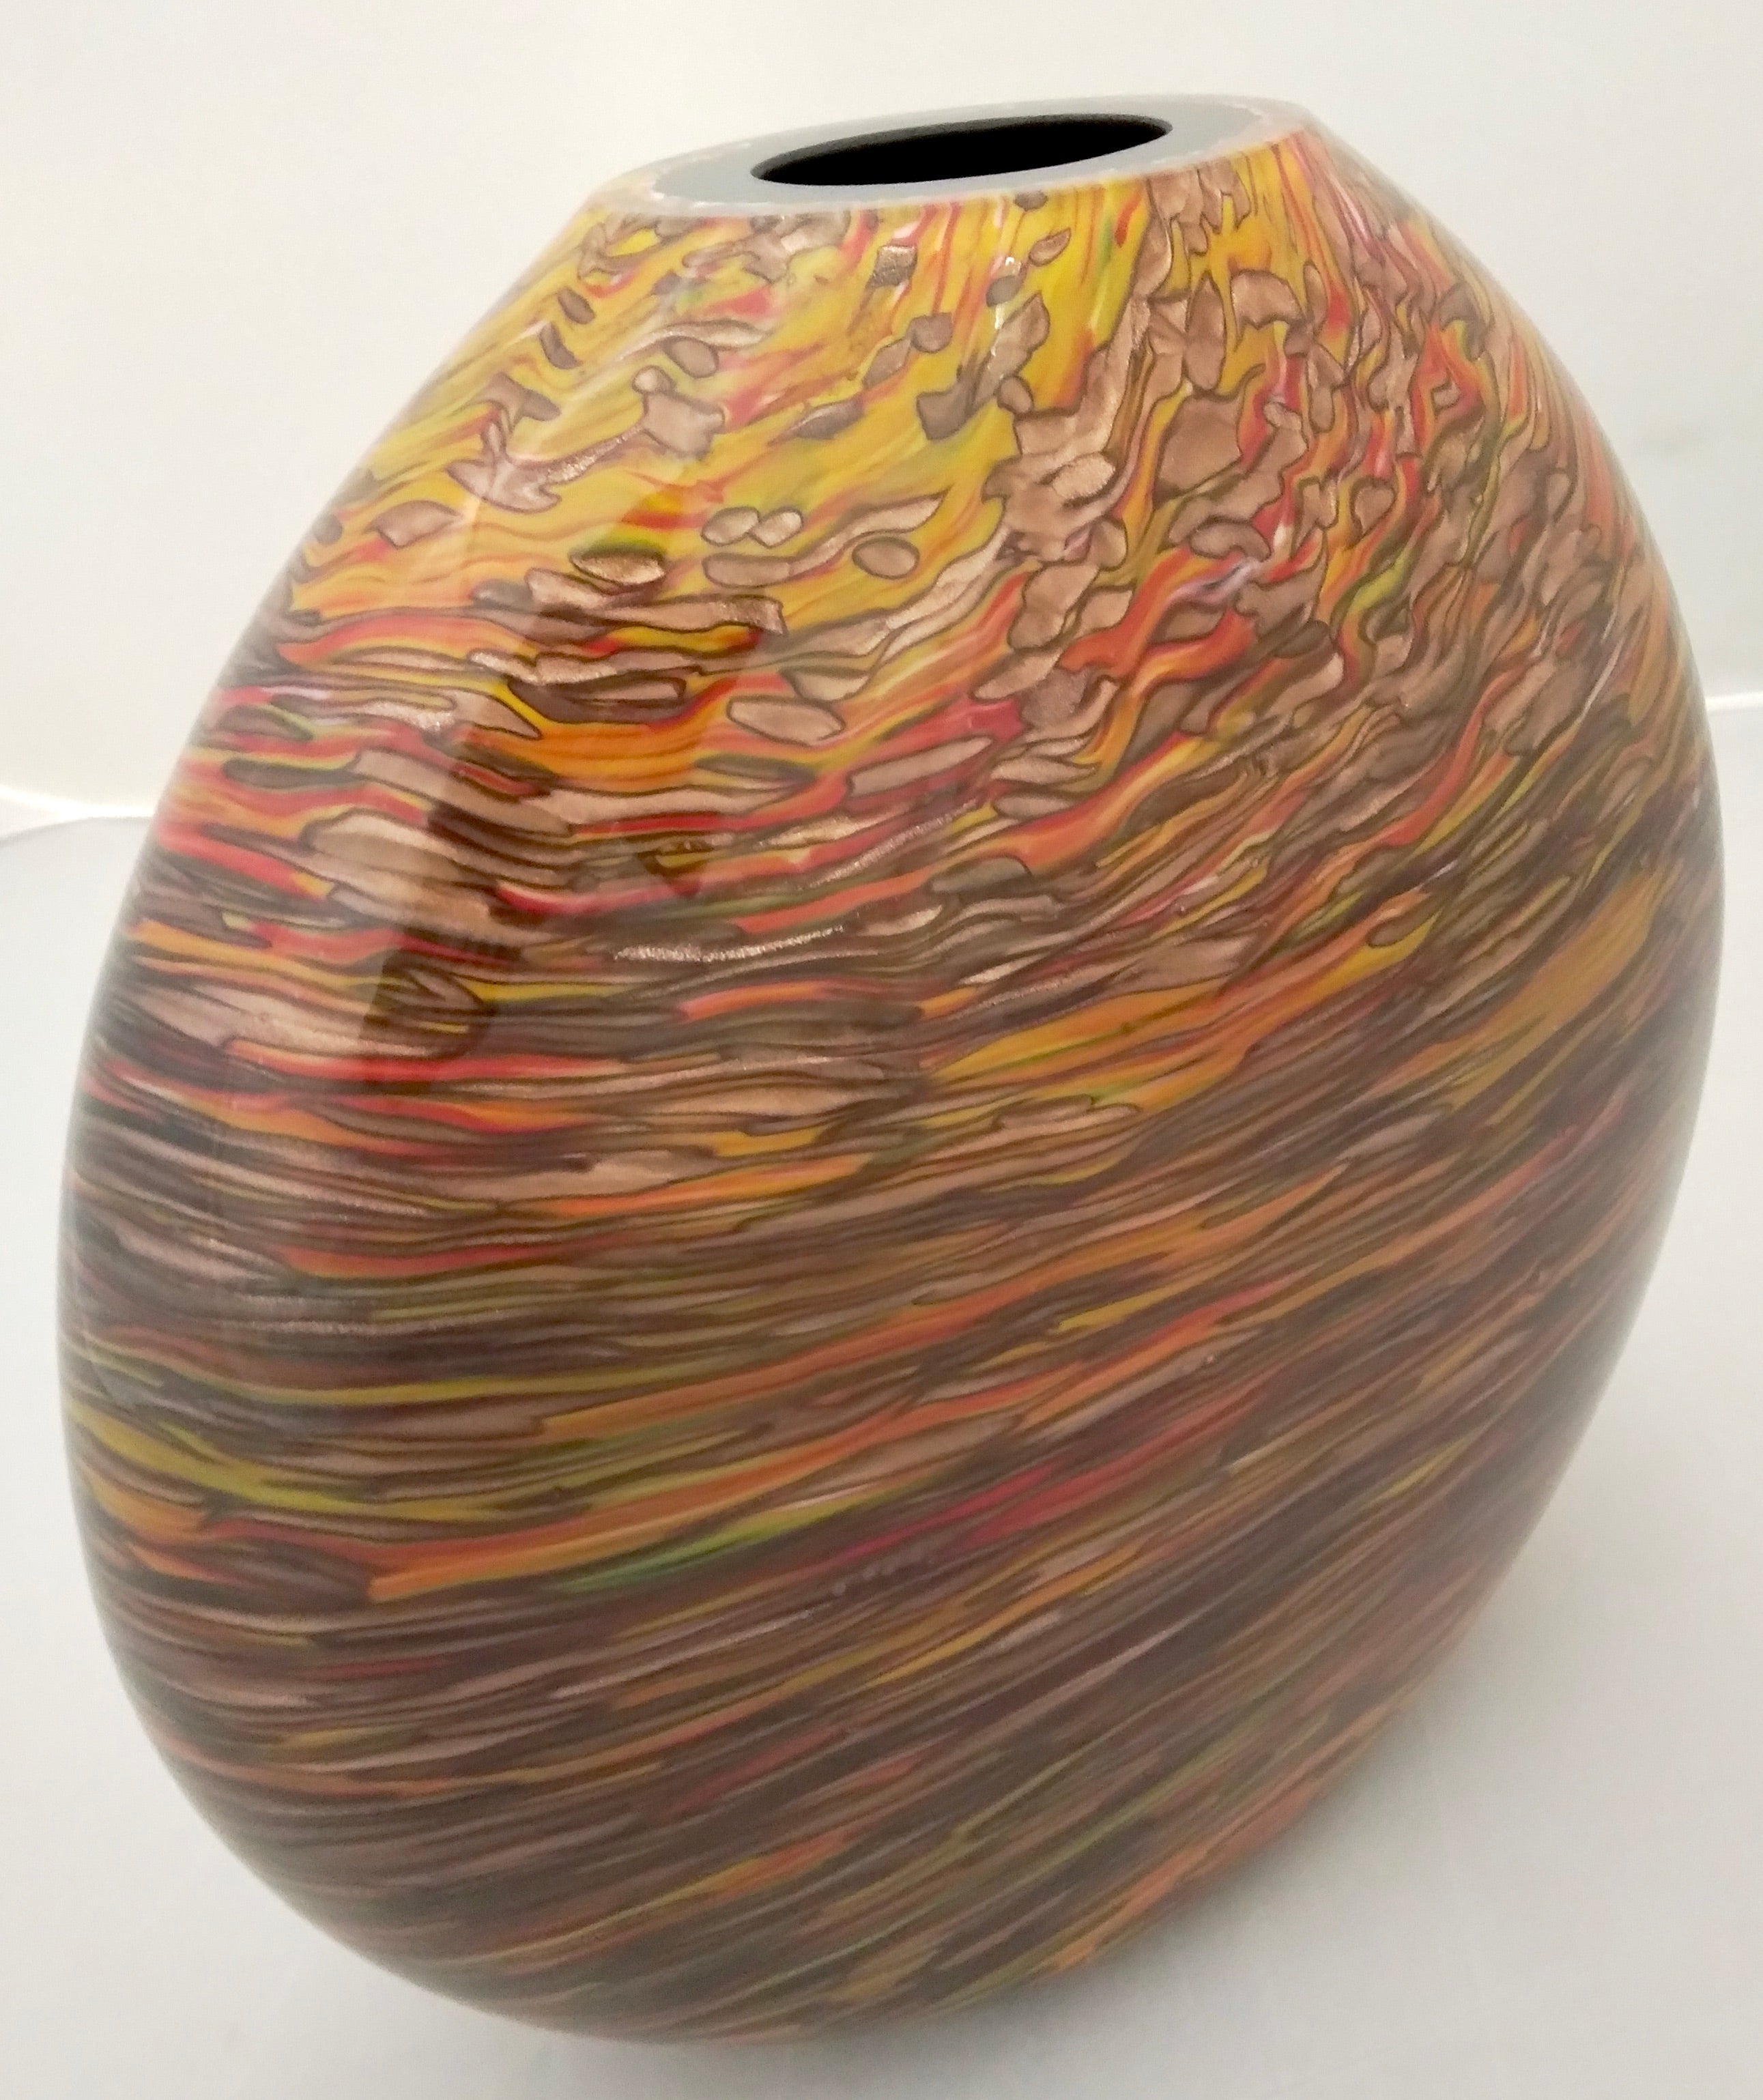 A striking elliptical oval vase, precious Works of Art in blown solid black Murano glass worked like a modern painting with a sophisticated extensive organic firey decor of overlaid elongated murrine in brown, green, yellow, orange, red colors